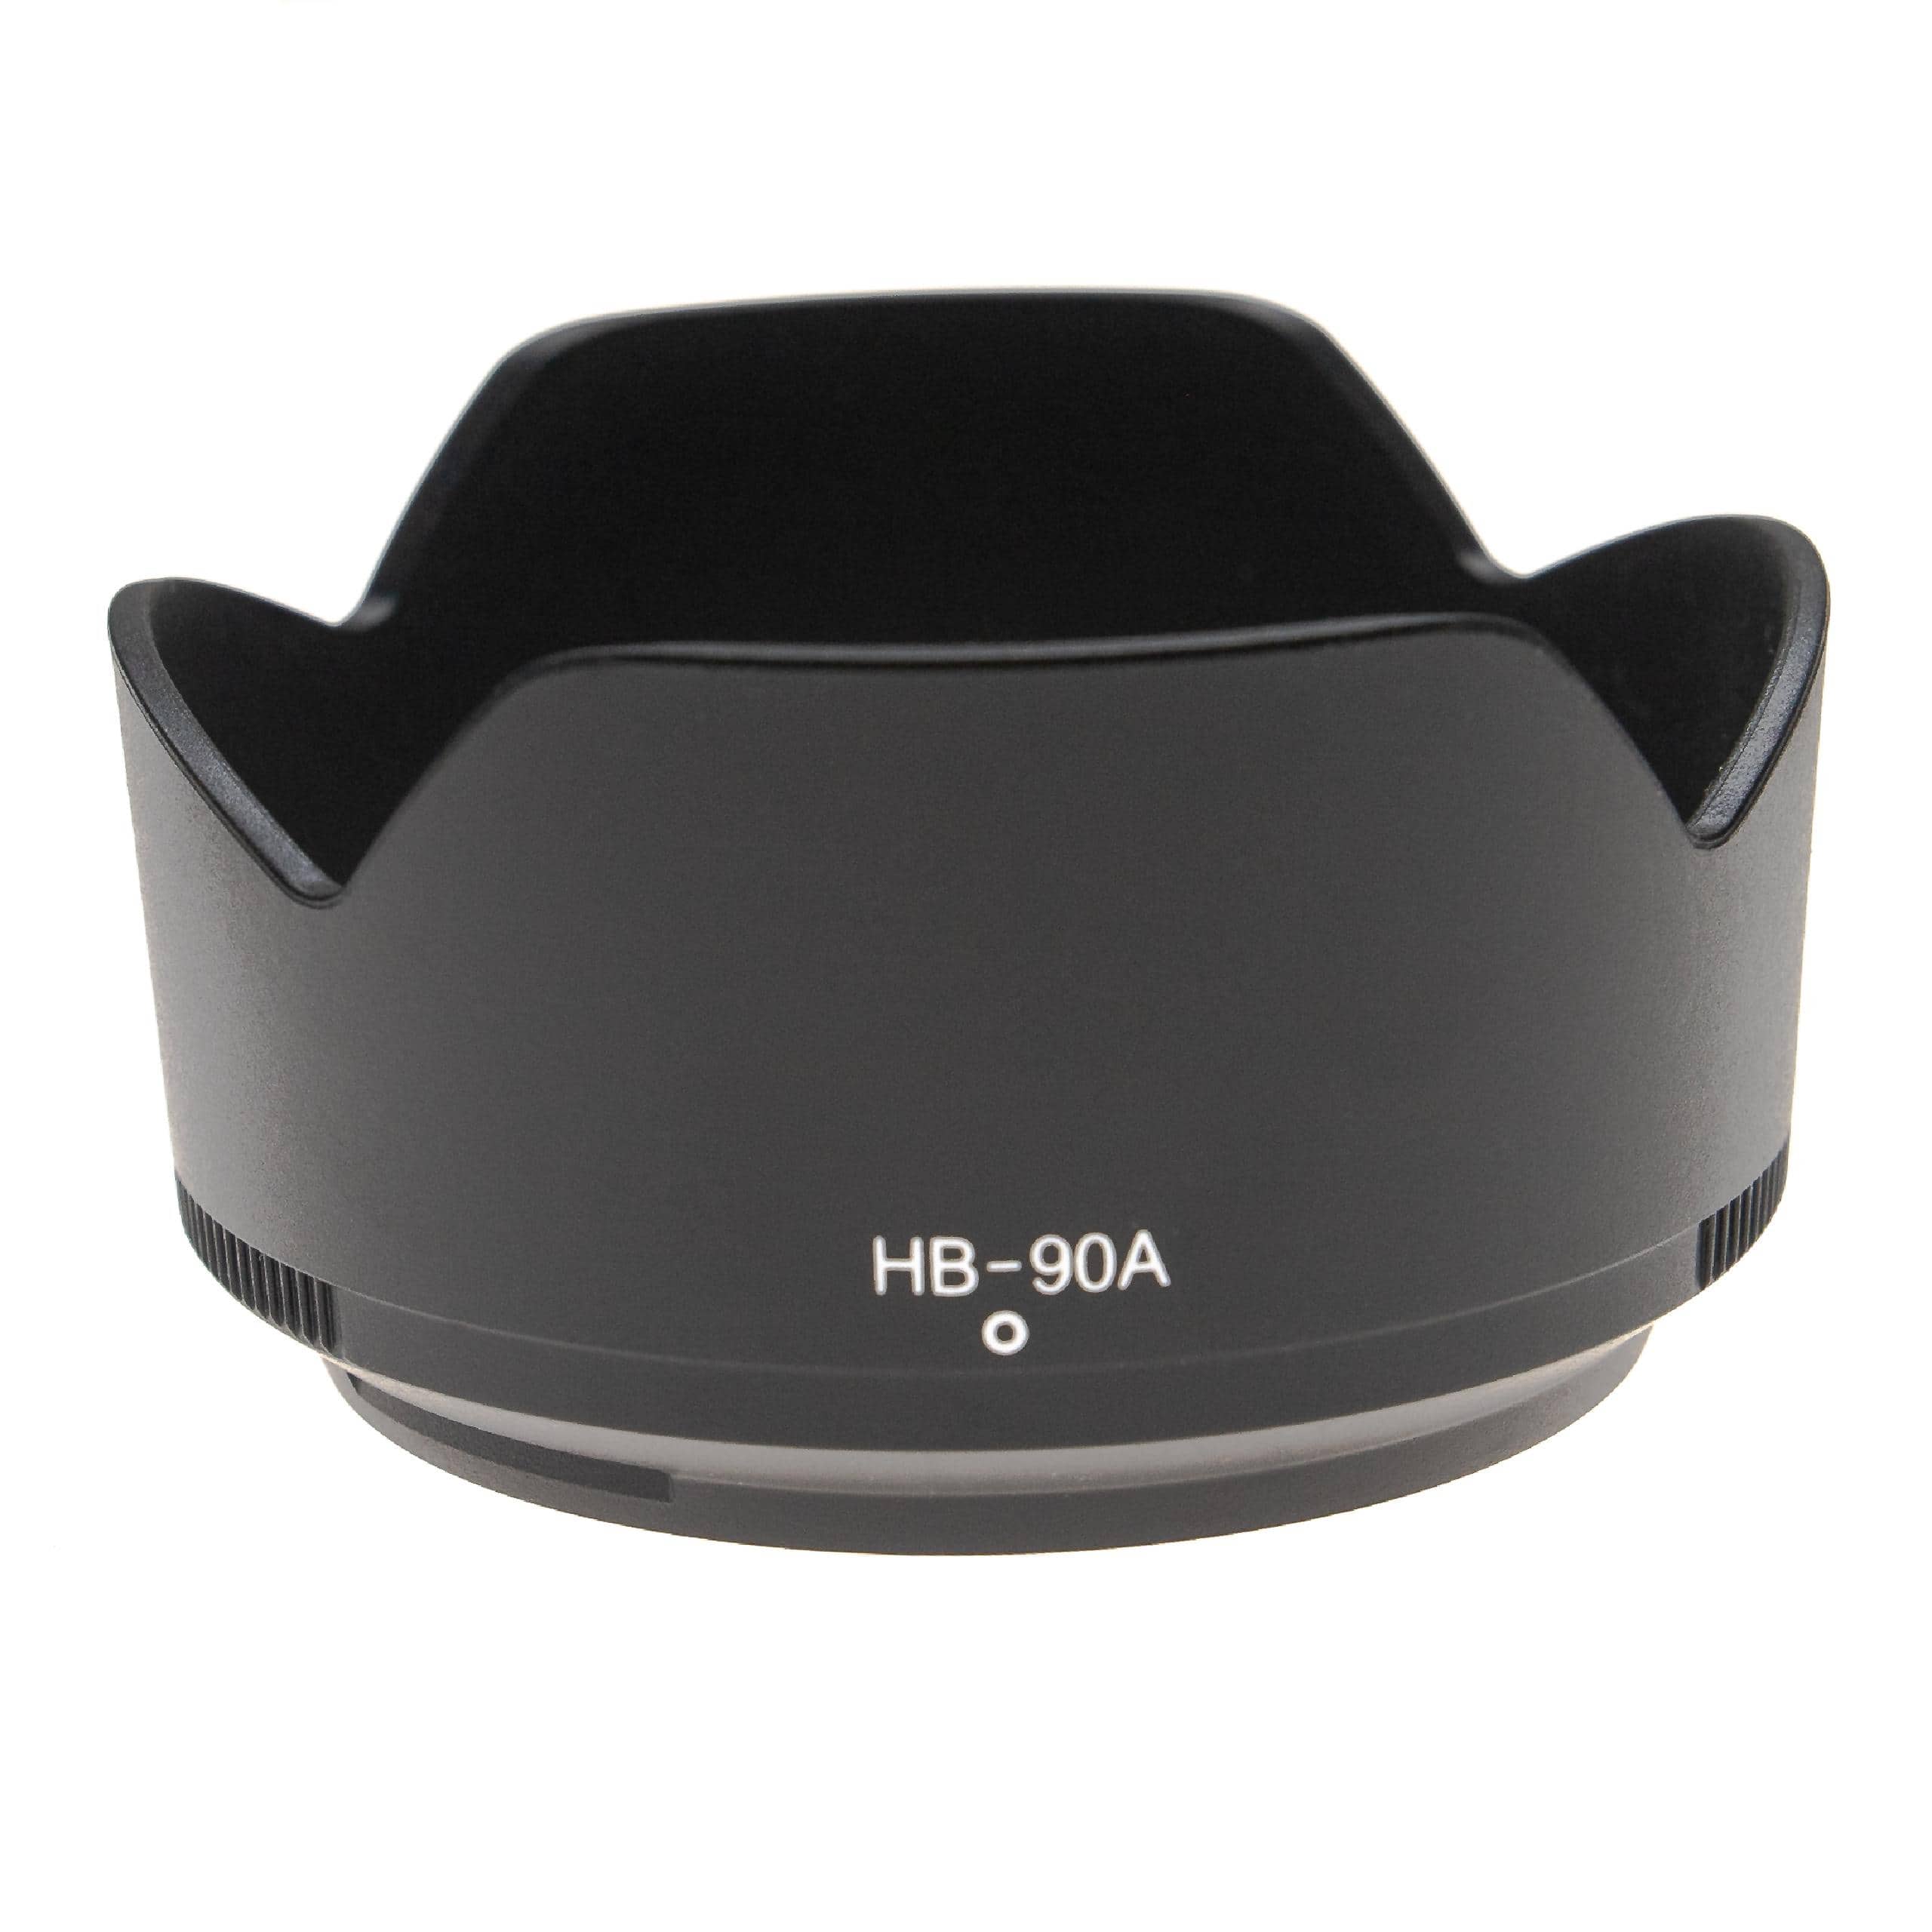 Lens Hood as Replacement for Nikon Lens HB-90A